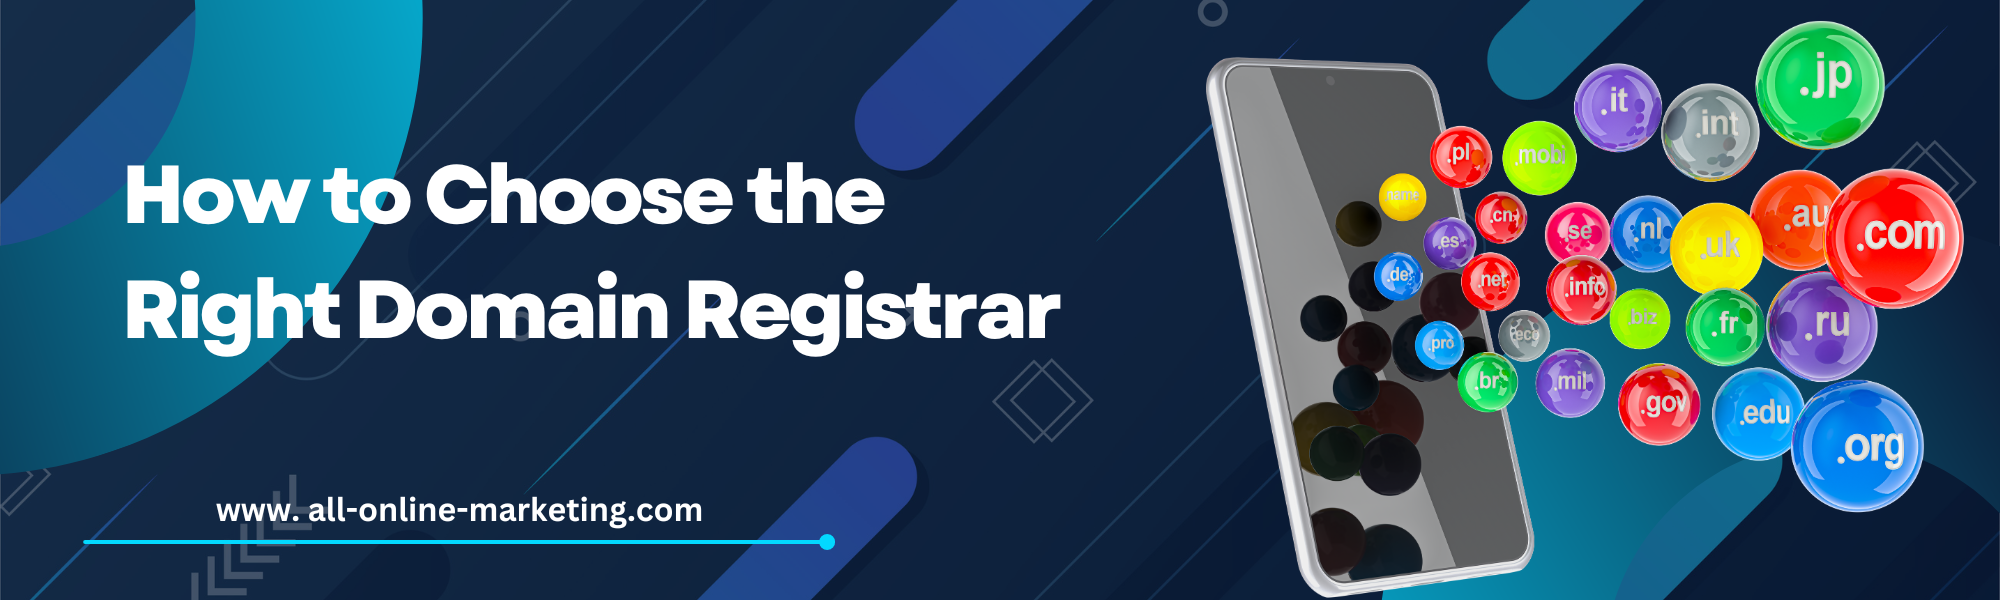 How to Choose the Right Domain Registrar